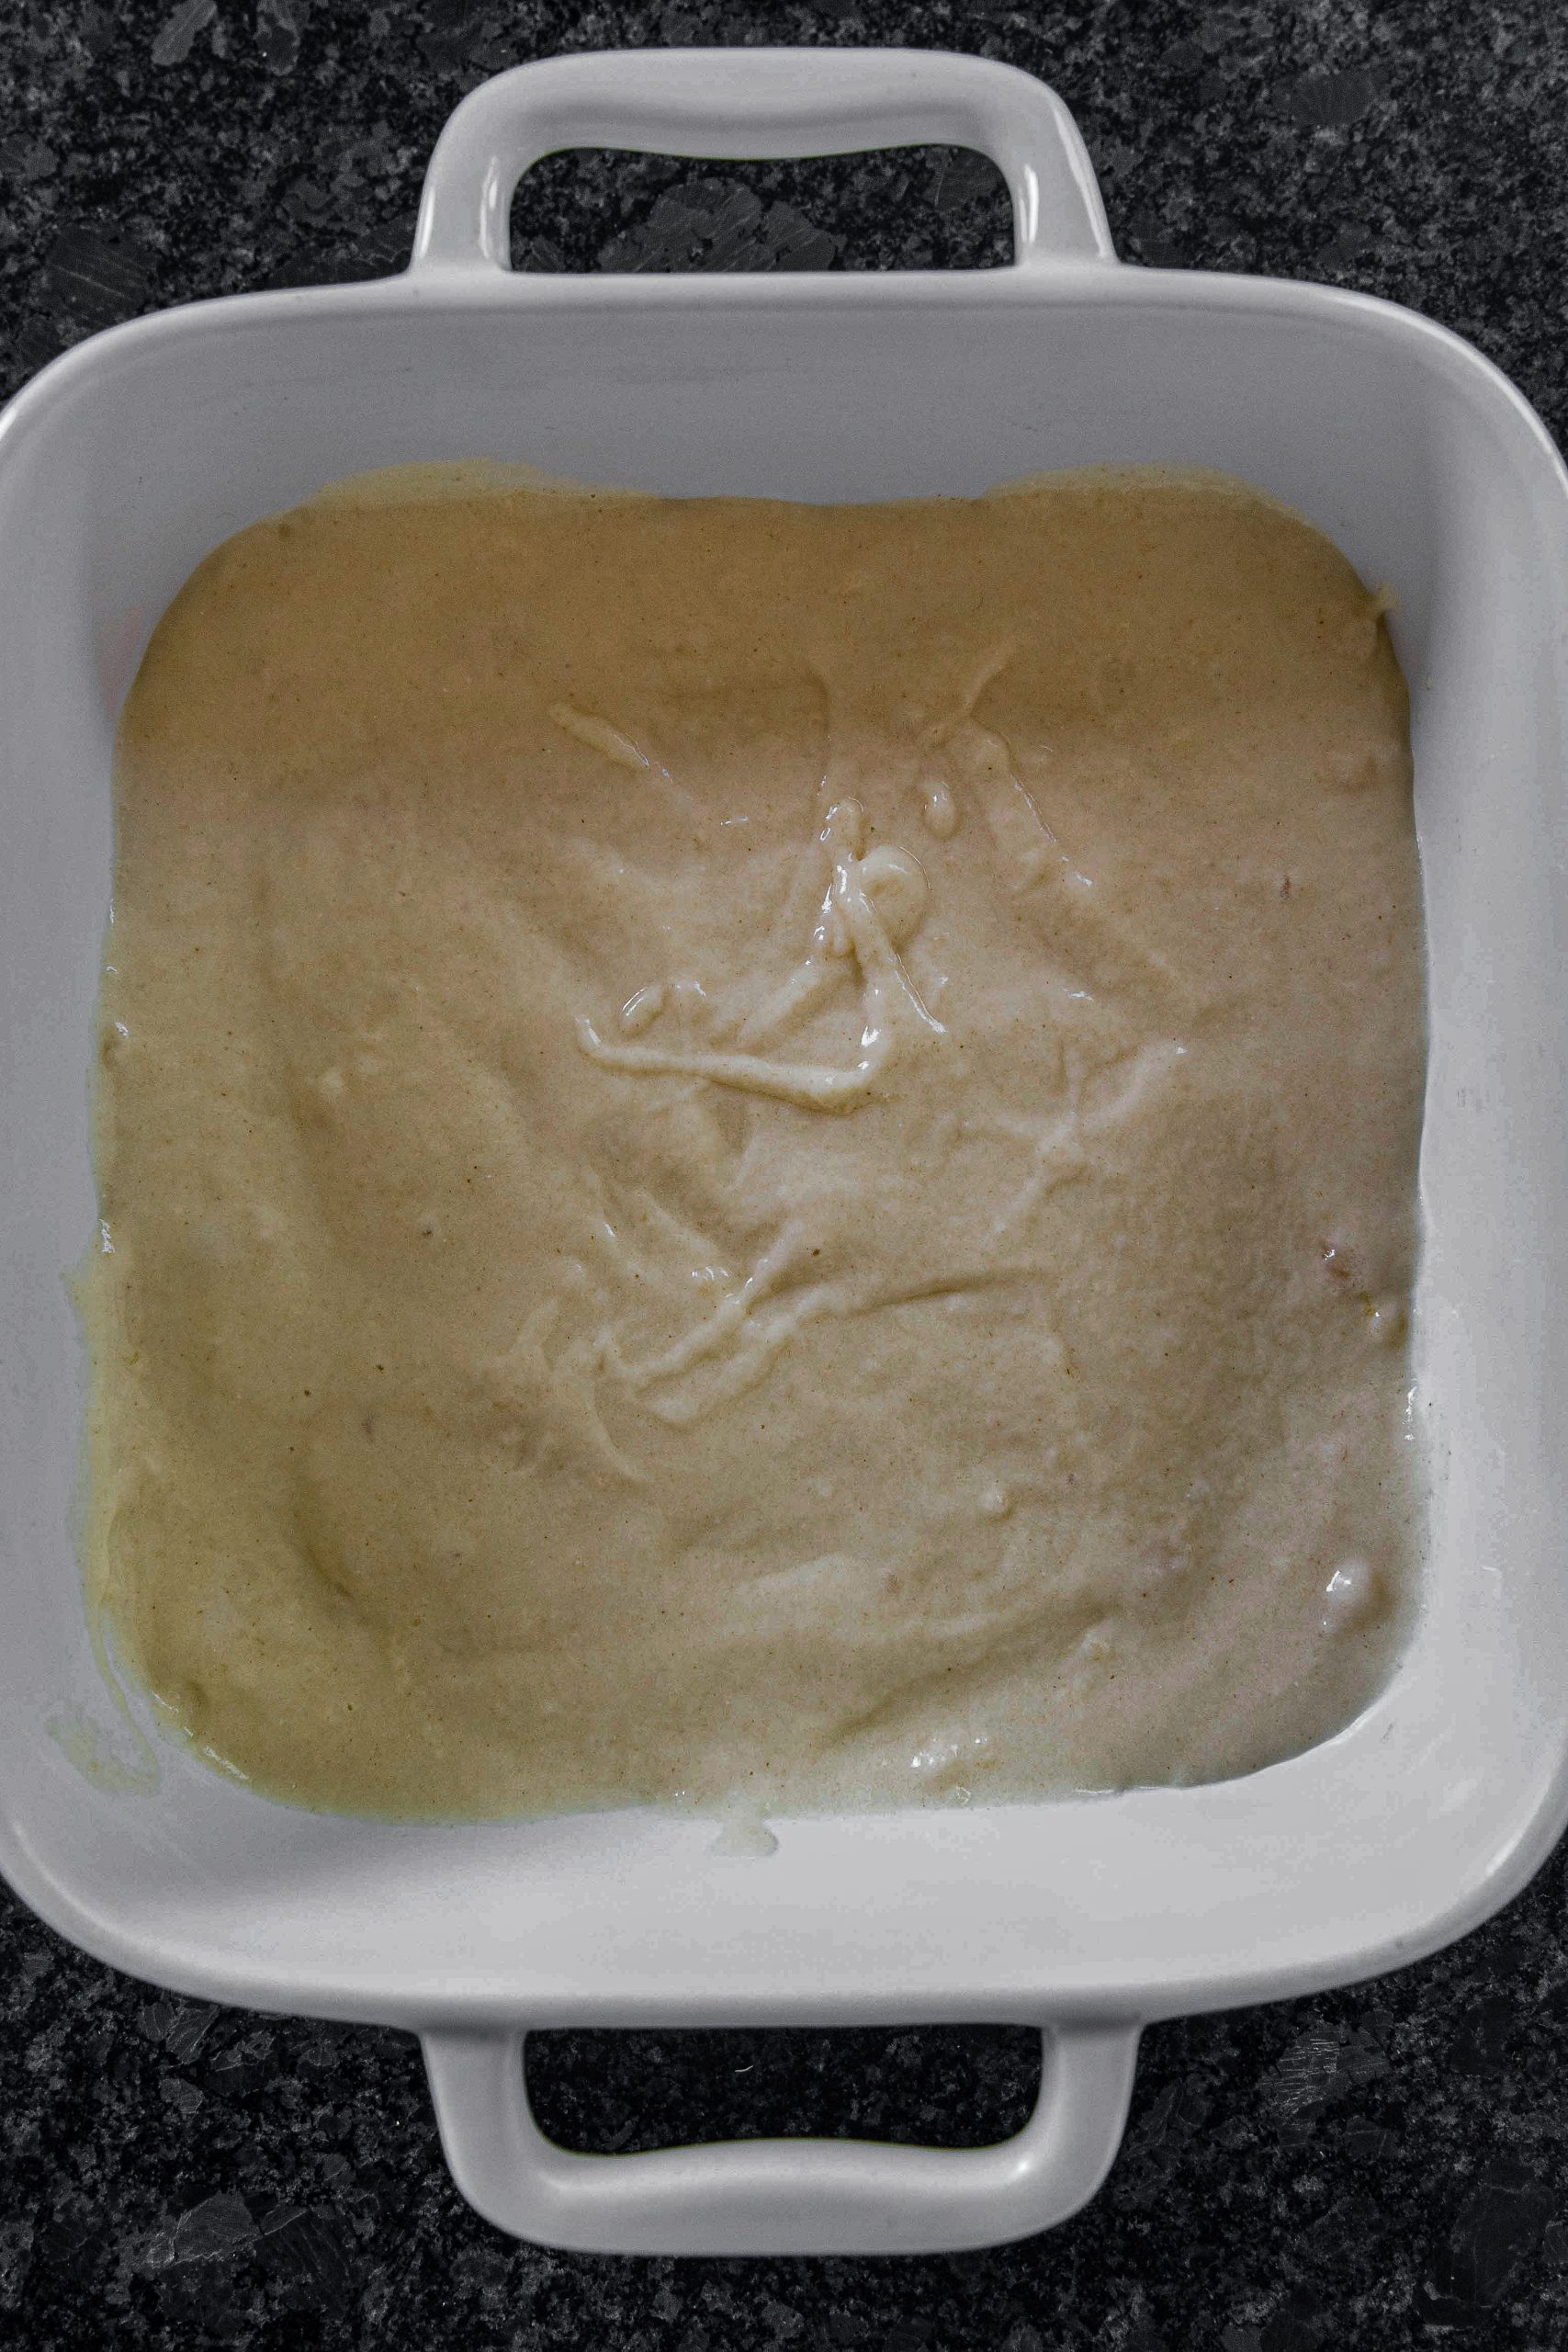 Pour the mixture into a medium baking dish. If you wish, you can cover the plate with non-stick paper, but don’t grease it.